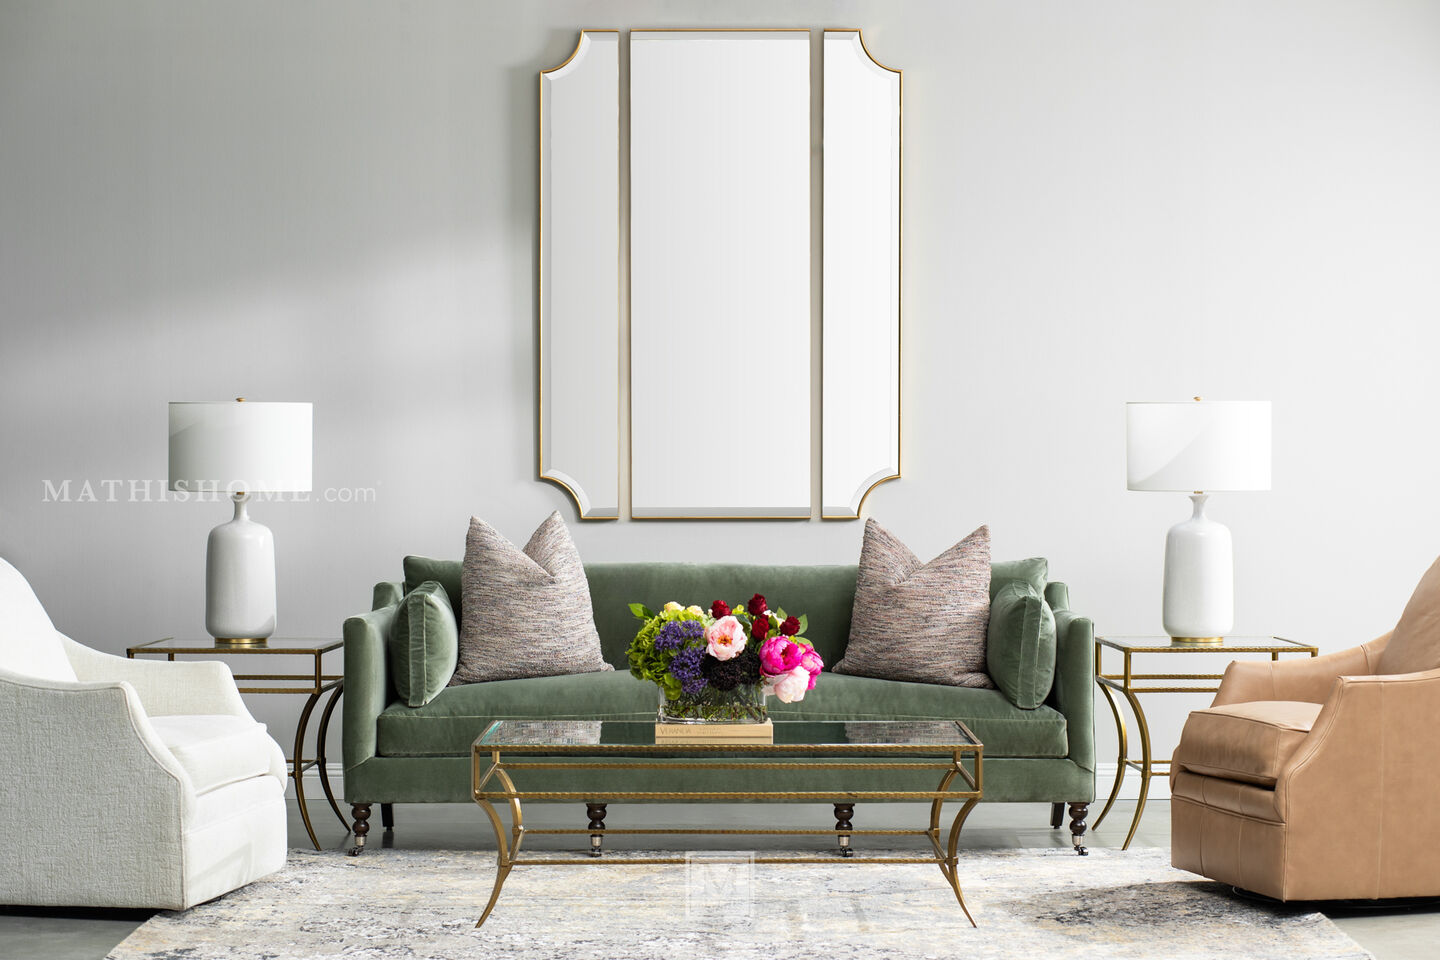 Rowe Madeline Sofa in Transitional Living Room